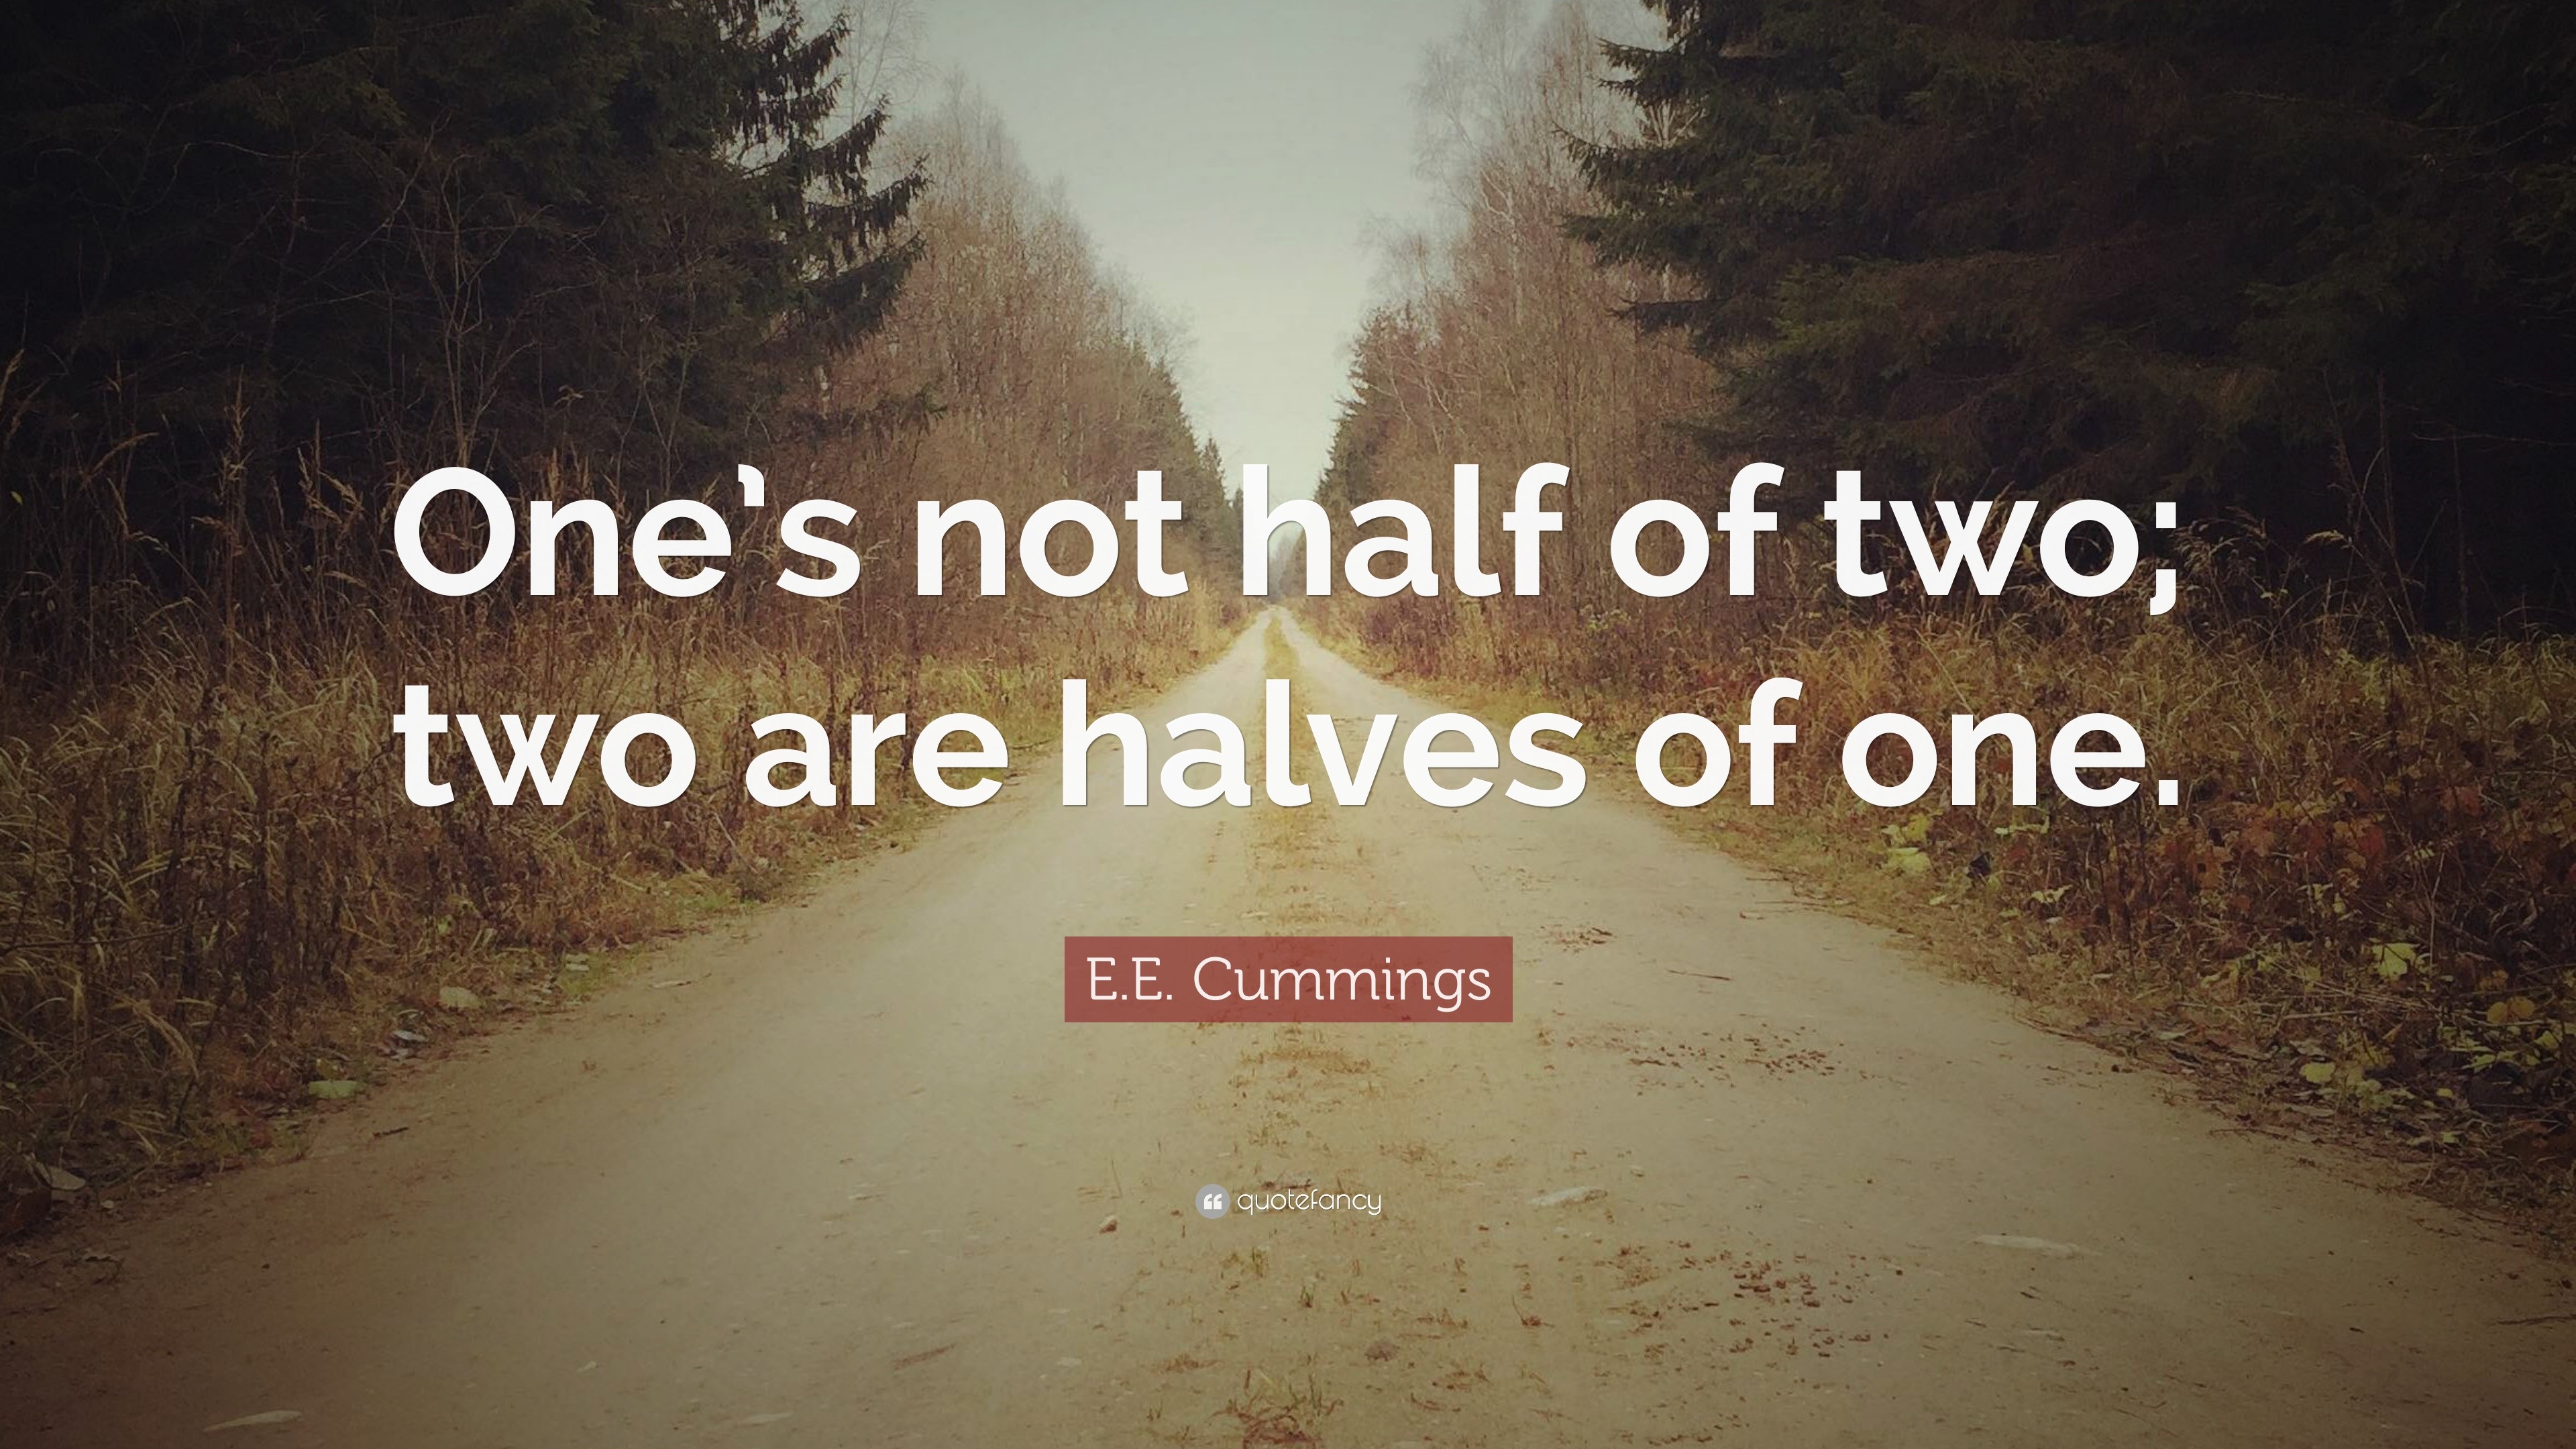 E.E. Cummings Quote: “One’s not half of two; two are halves of one.” (12 ...